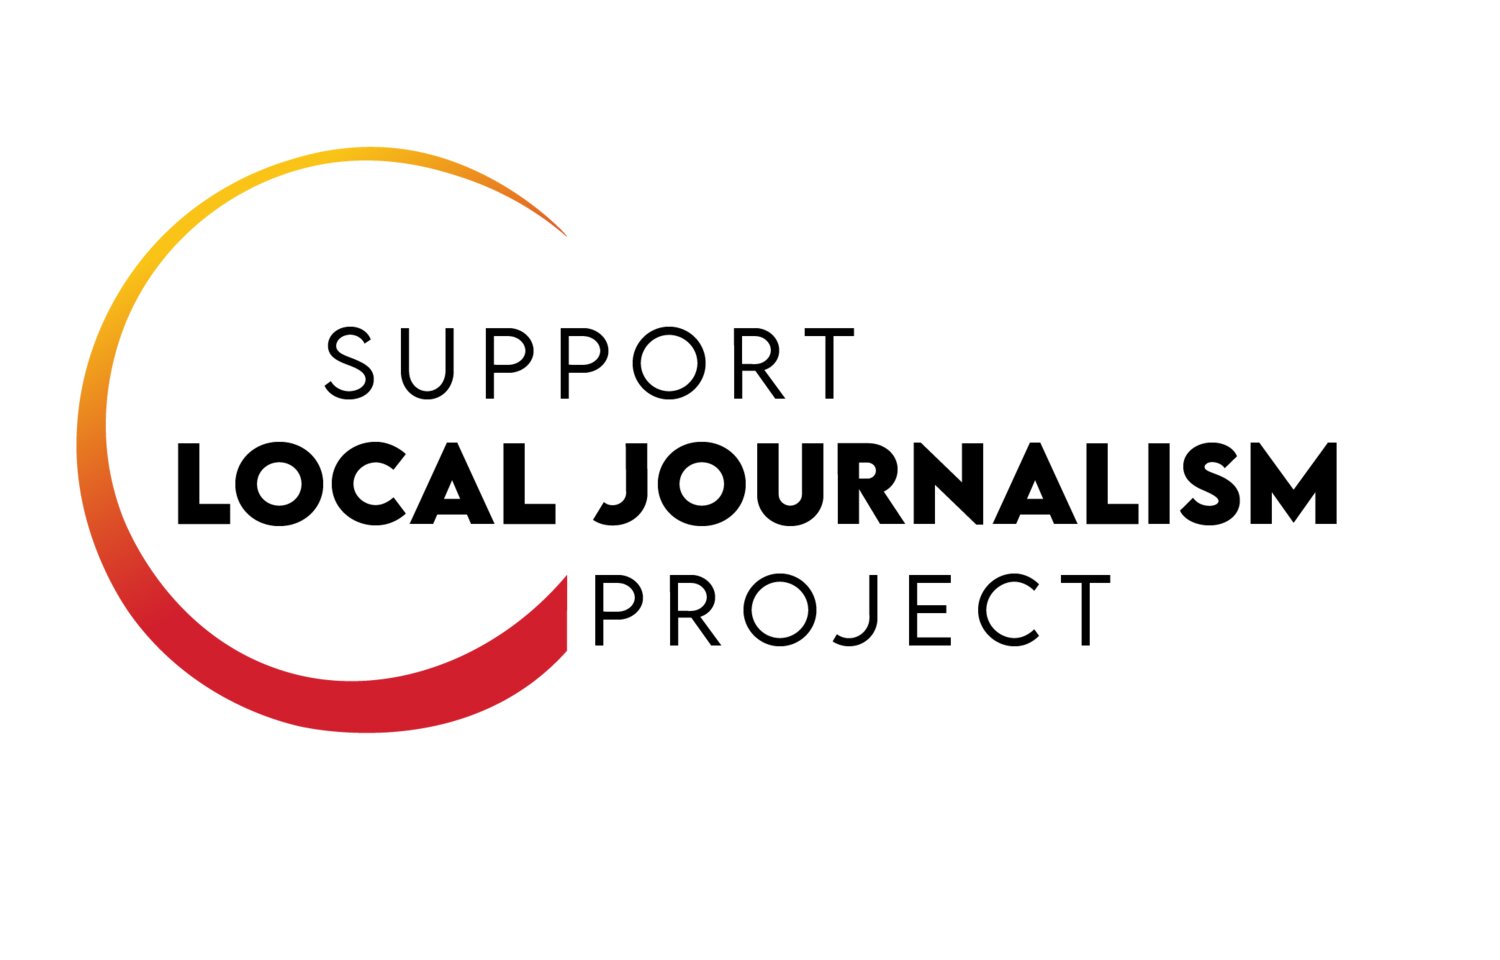 Support Local Journalism Project logo